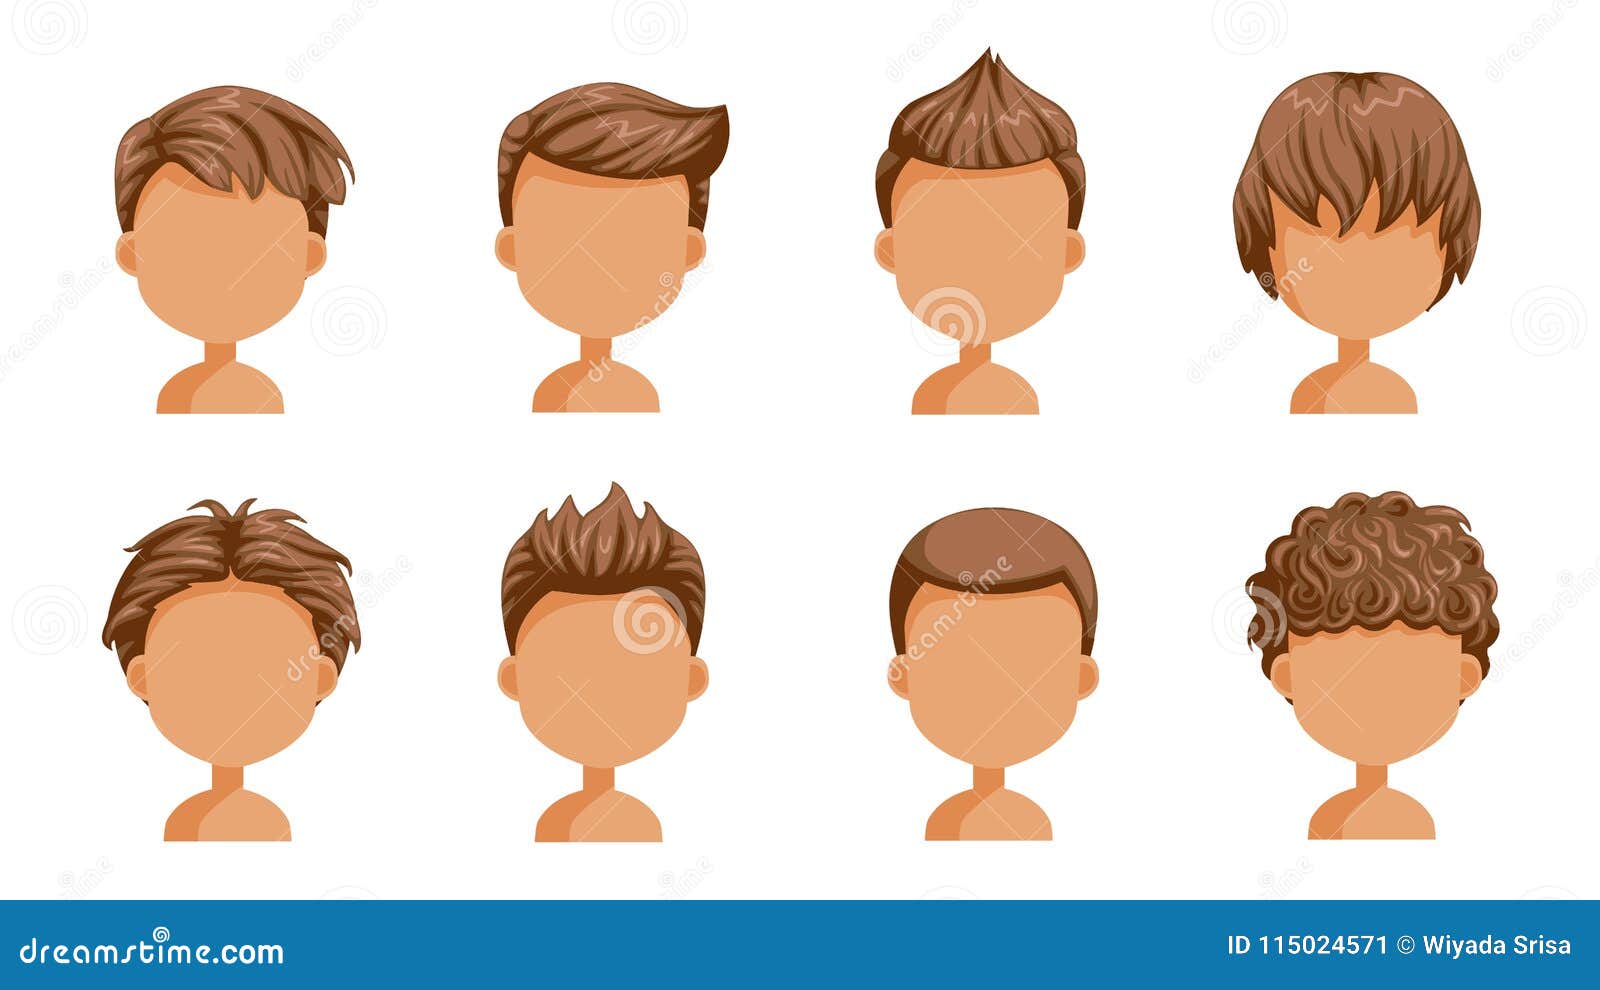 how to draw little boy hair